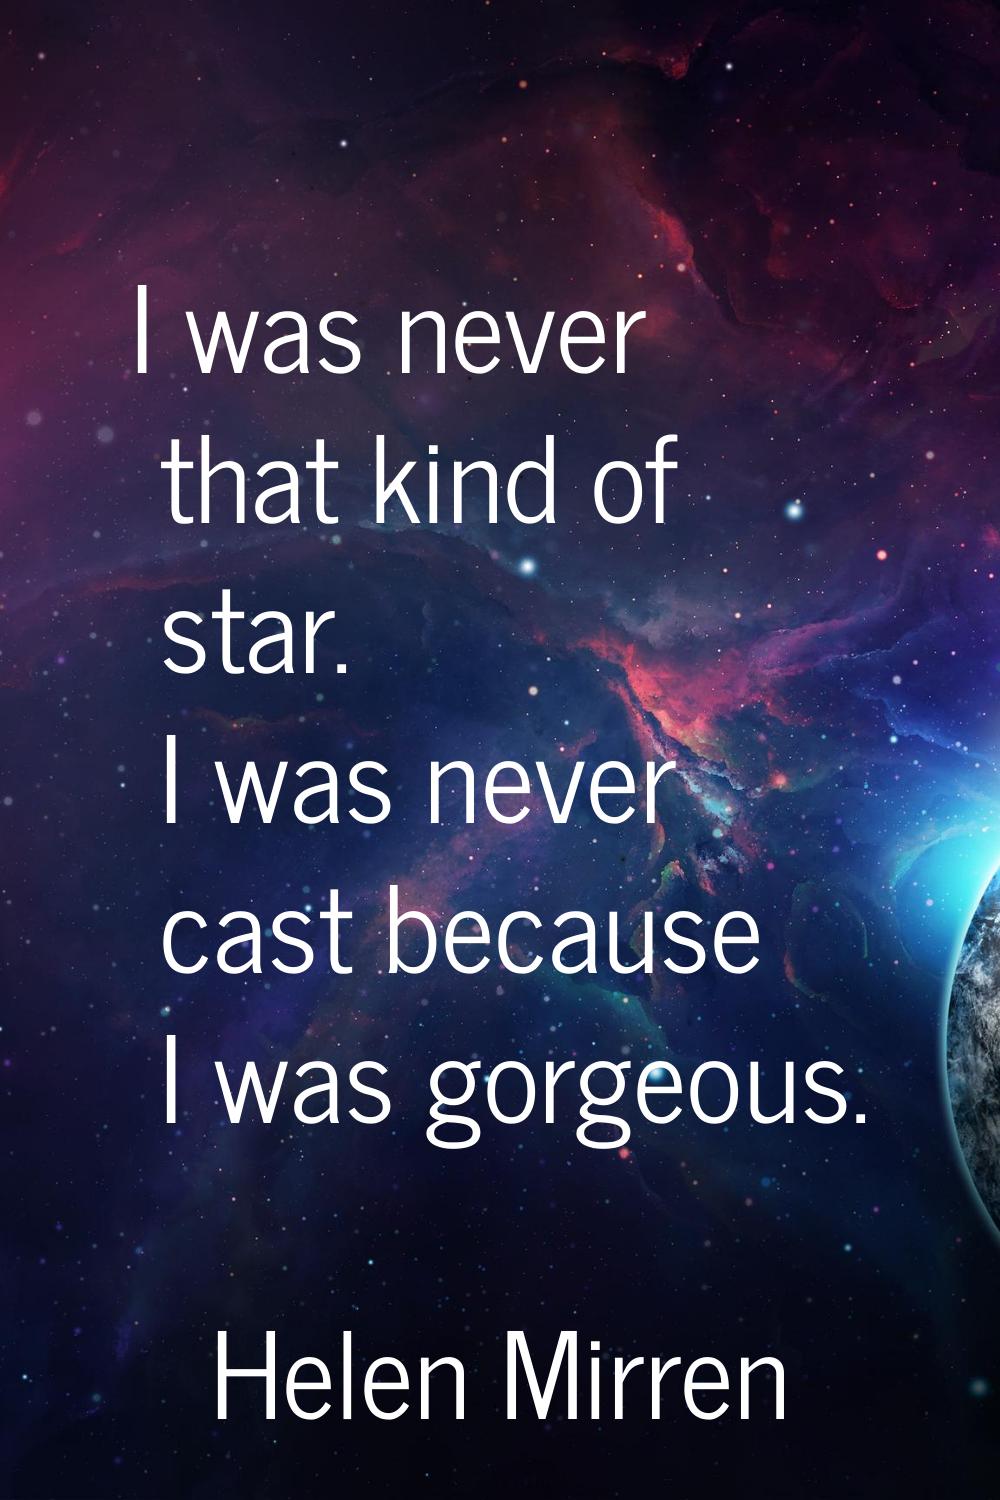 I was never that kind of star. I was never cast because I was gorgeous.